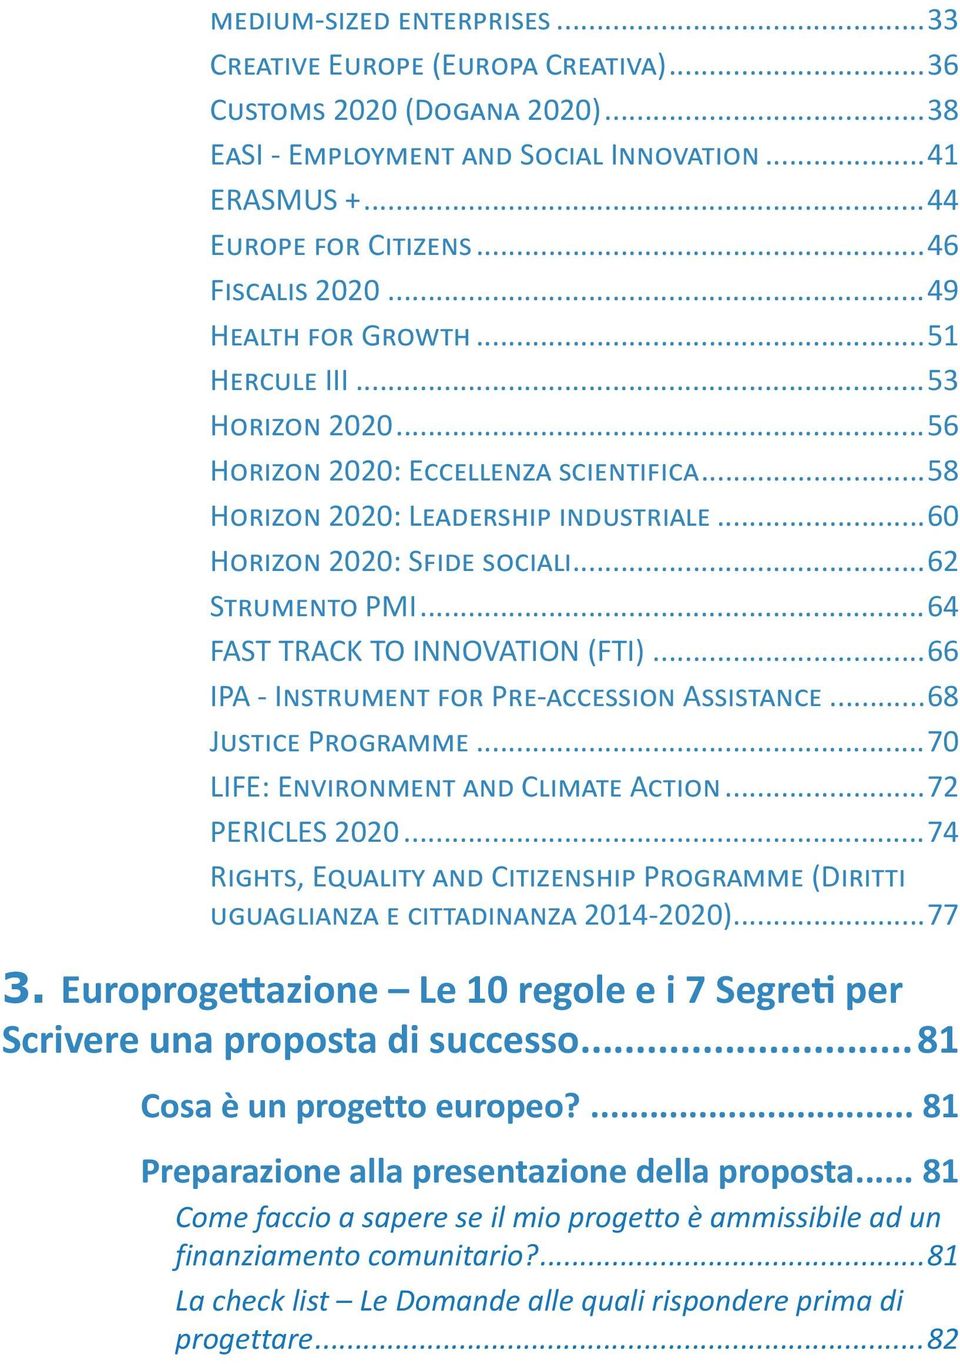 ..64 FAST TRACK TO INNOVATION (FTI)...66 IPA - Instrument for Pre-accession Assistance...68 Justice Programme...70 LIFE: Environment and Climate Action...72 PERICLES 2020.